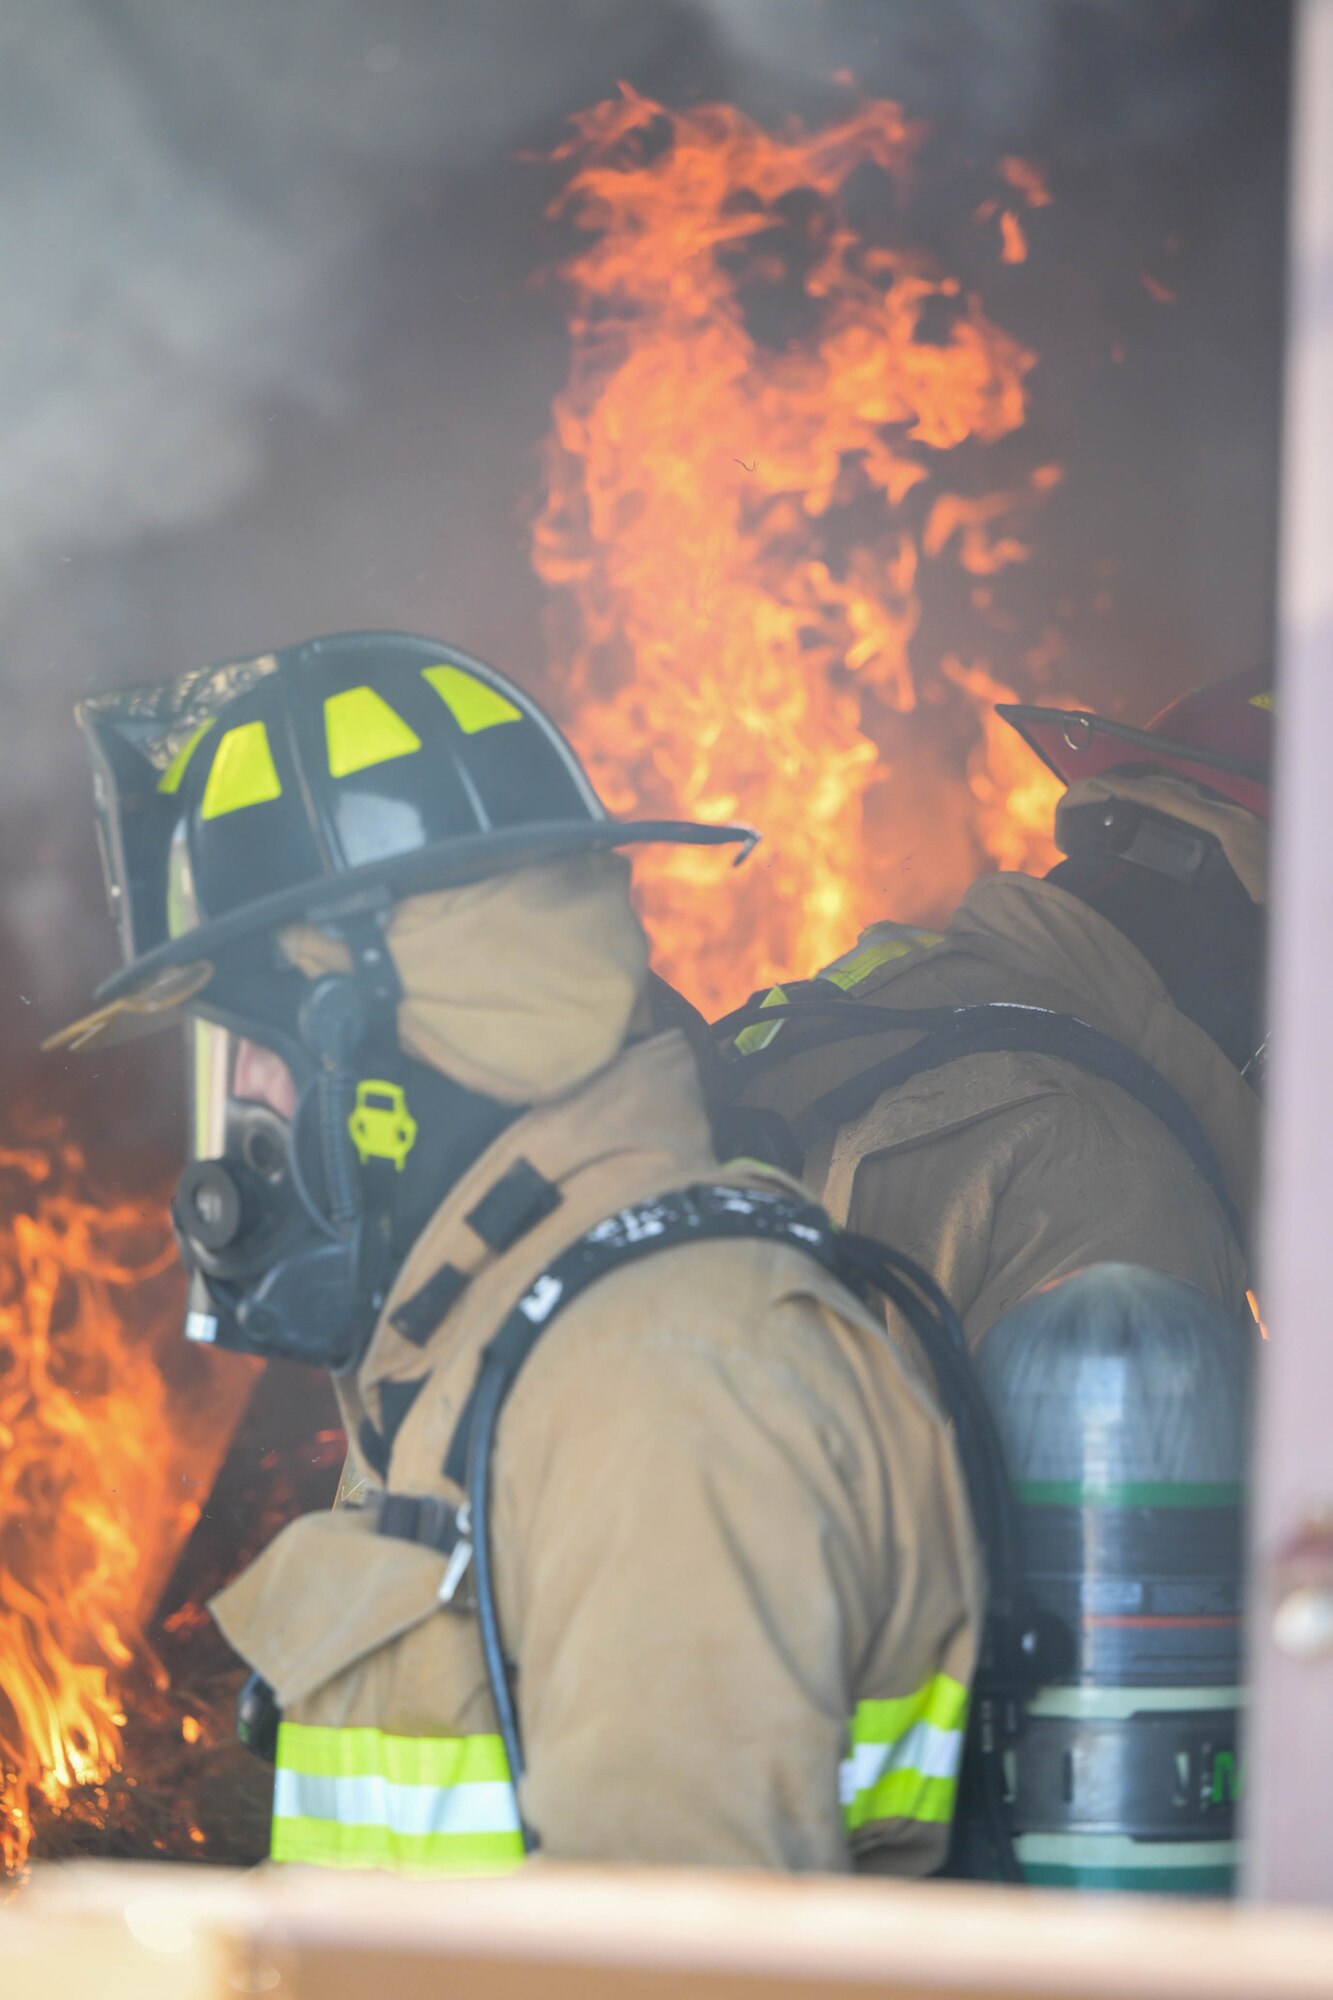 Liberty Township firefighters respond to a structural fire during a training event at Youngstown Air Reserve Station, Ohio, utilizing the base fire department's structural fire training building on Oct. 3, 2023.